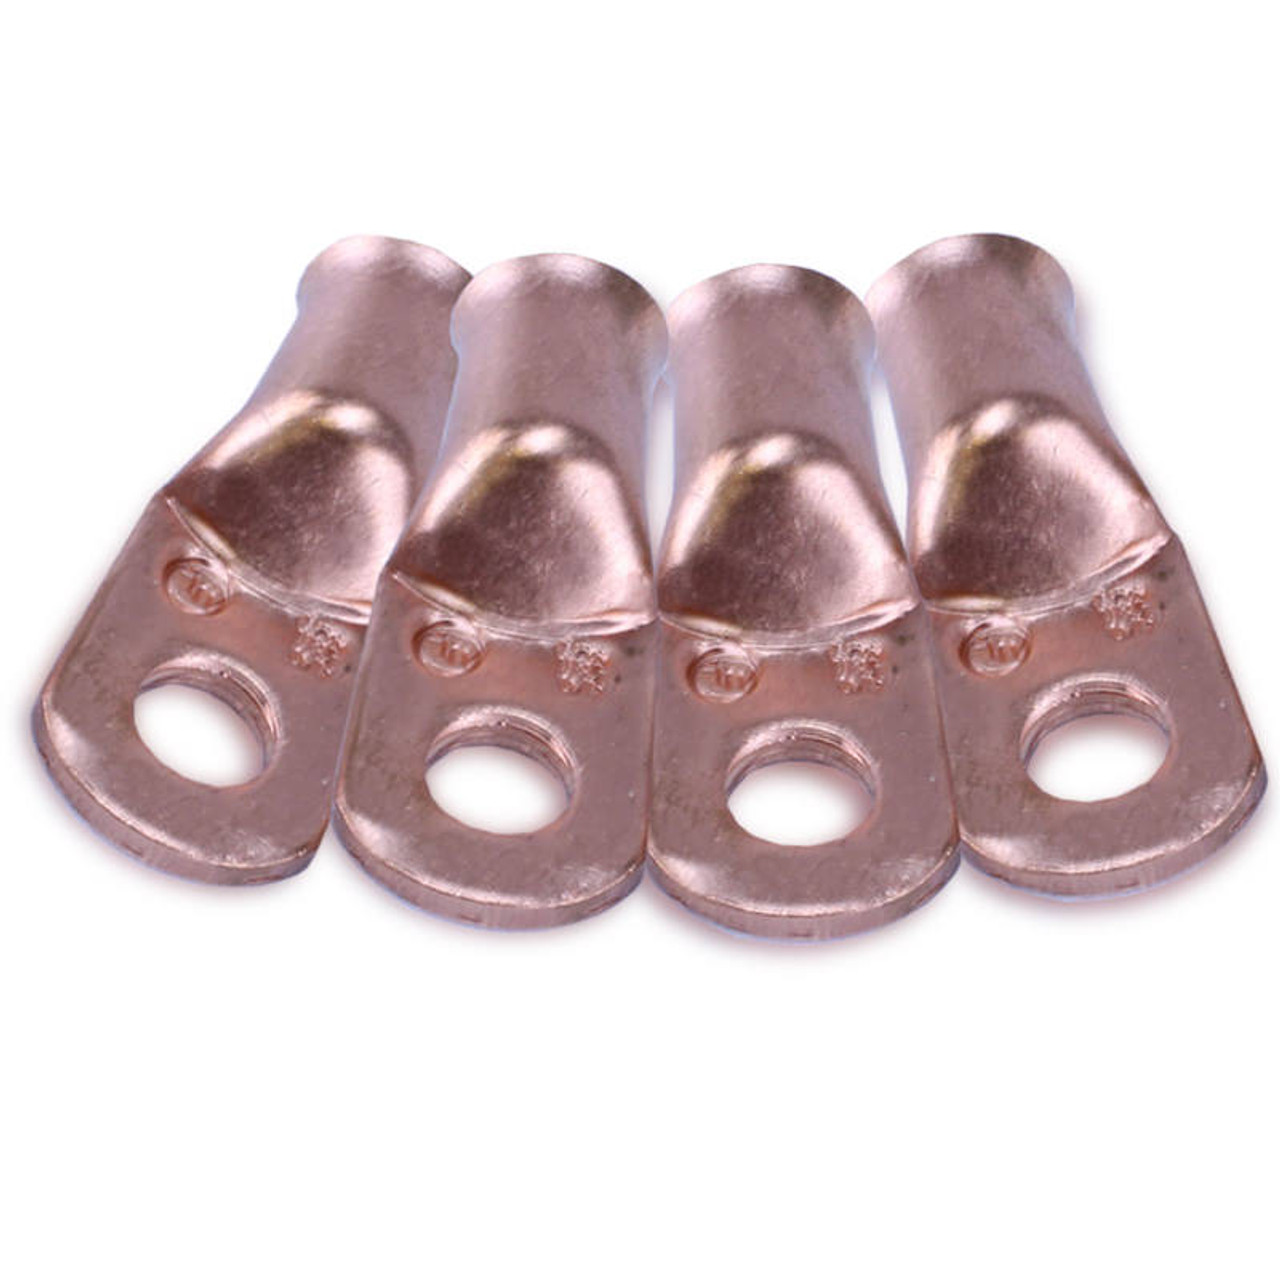 Mechman 1/0 Gauge Copper Cable End 5/16in Hole 4 Pack - MECCR10516